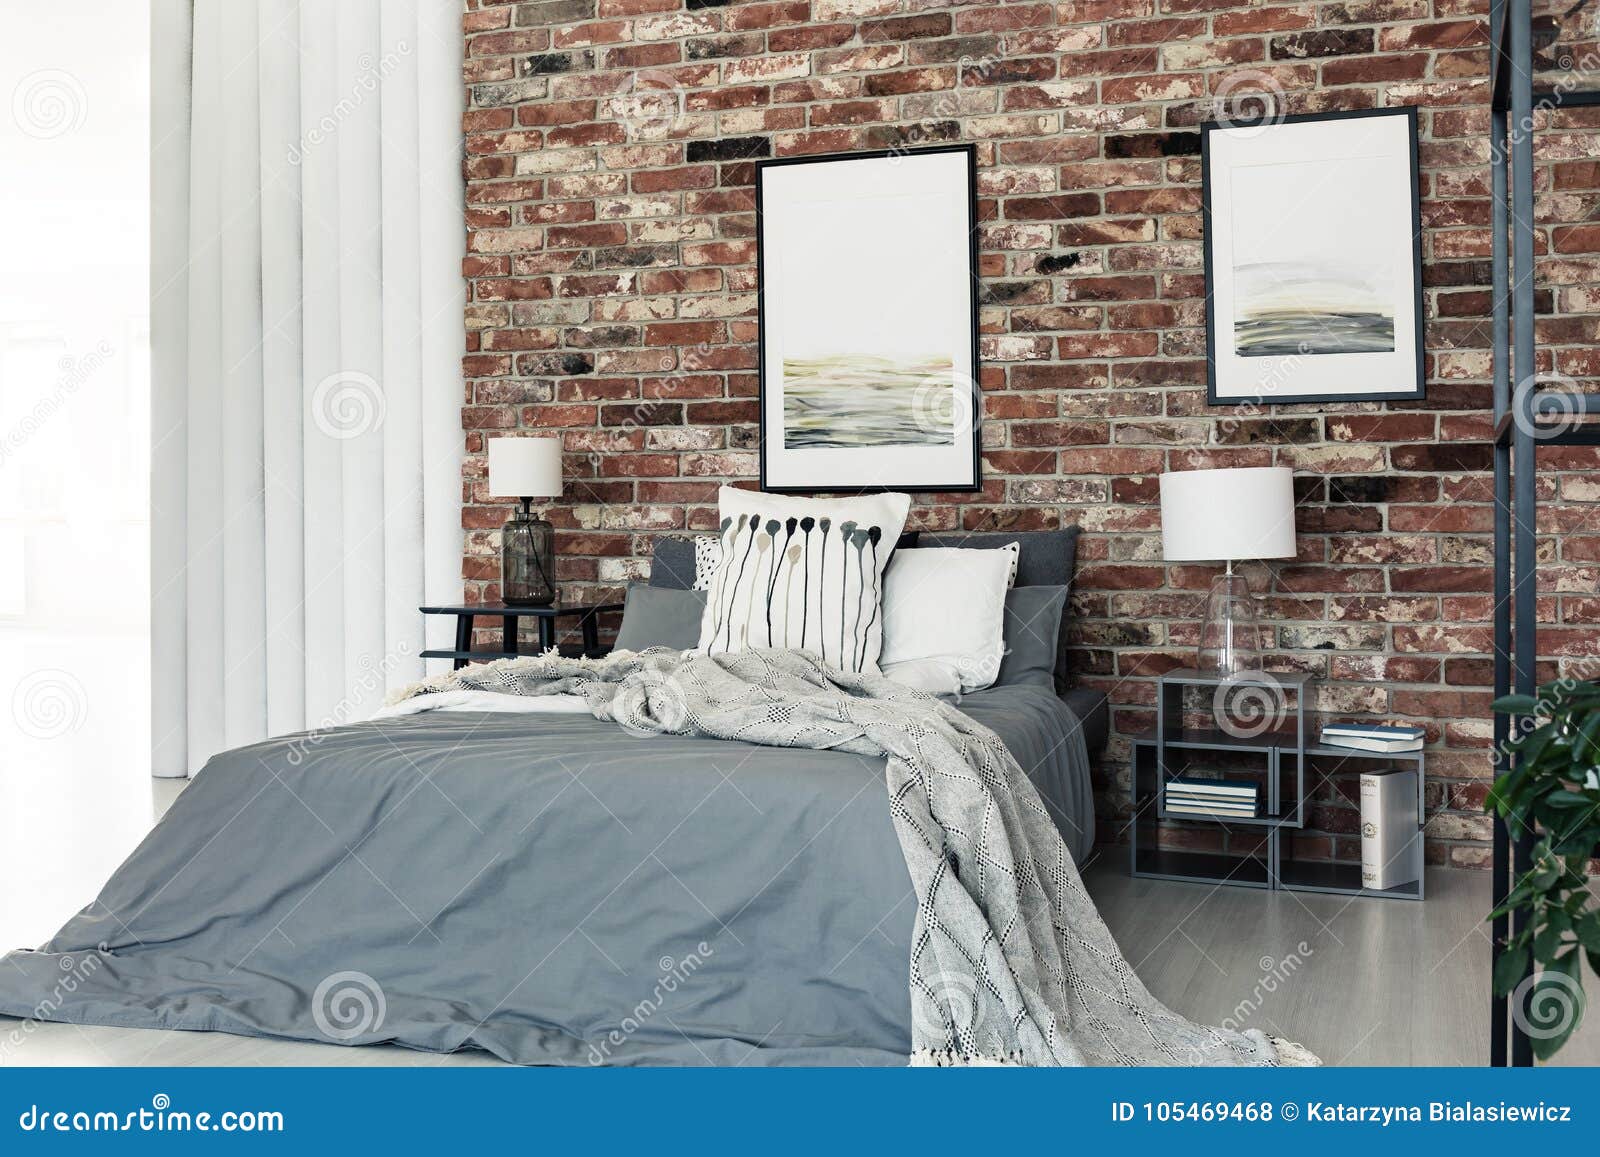 Coverlet On Bed Stock Photo Image Of Lying Brick King 105469468